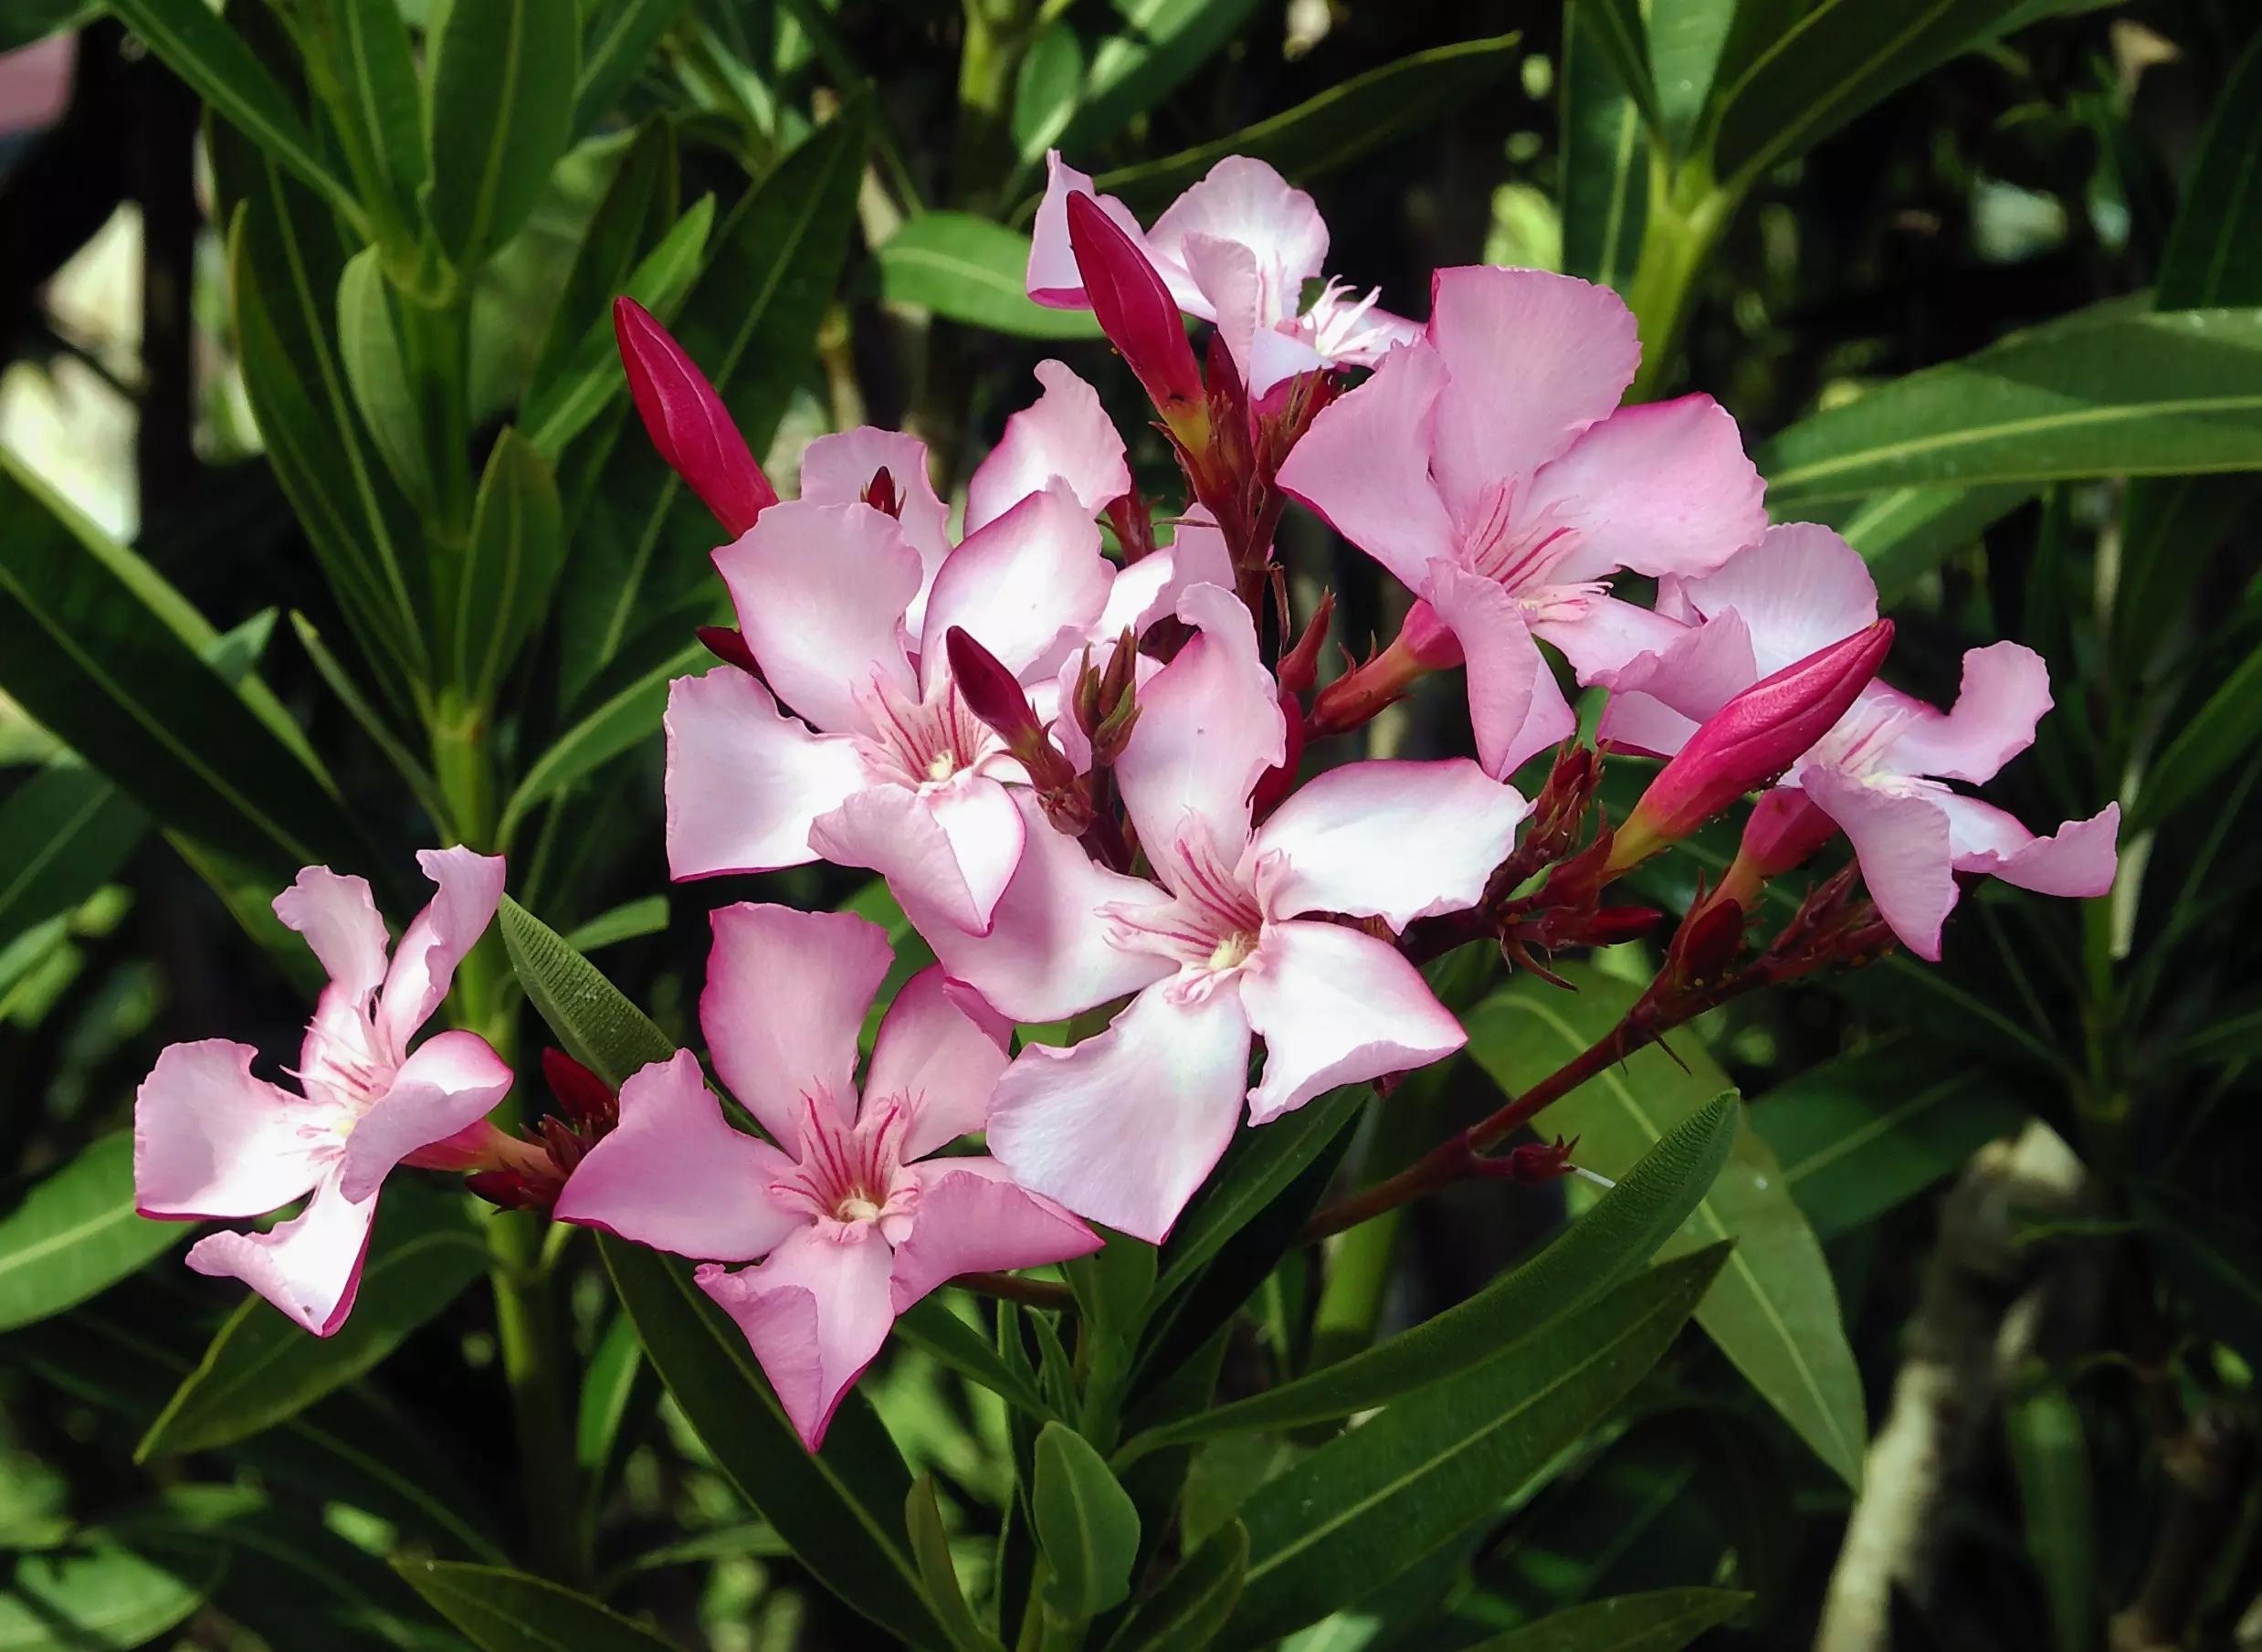 Kerala temple boards stop using oleander flowers in rituals due to toxicity concerns